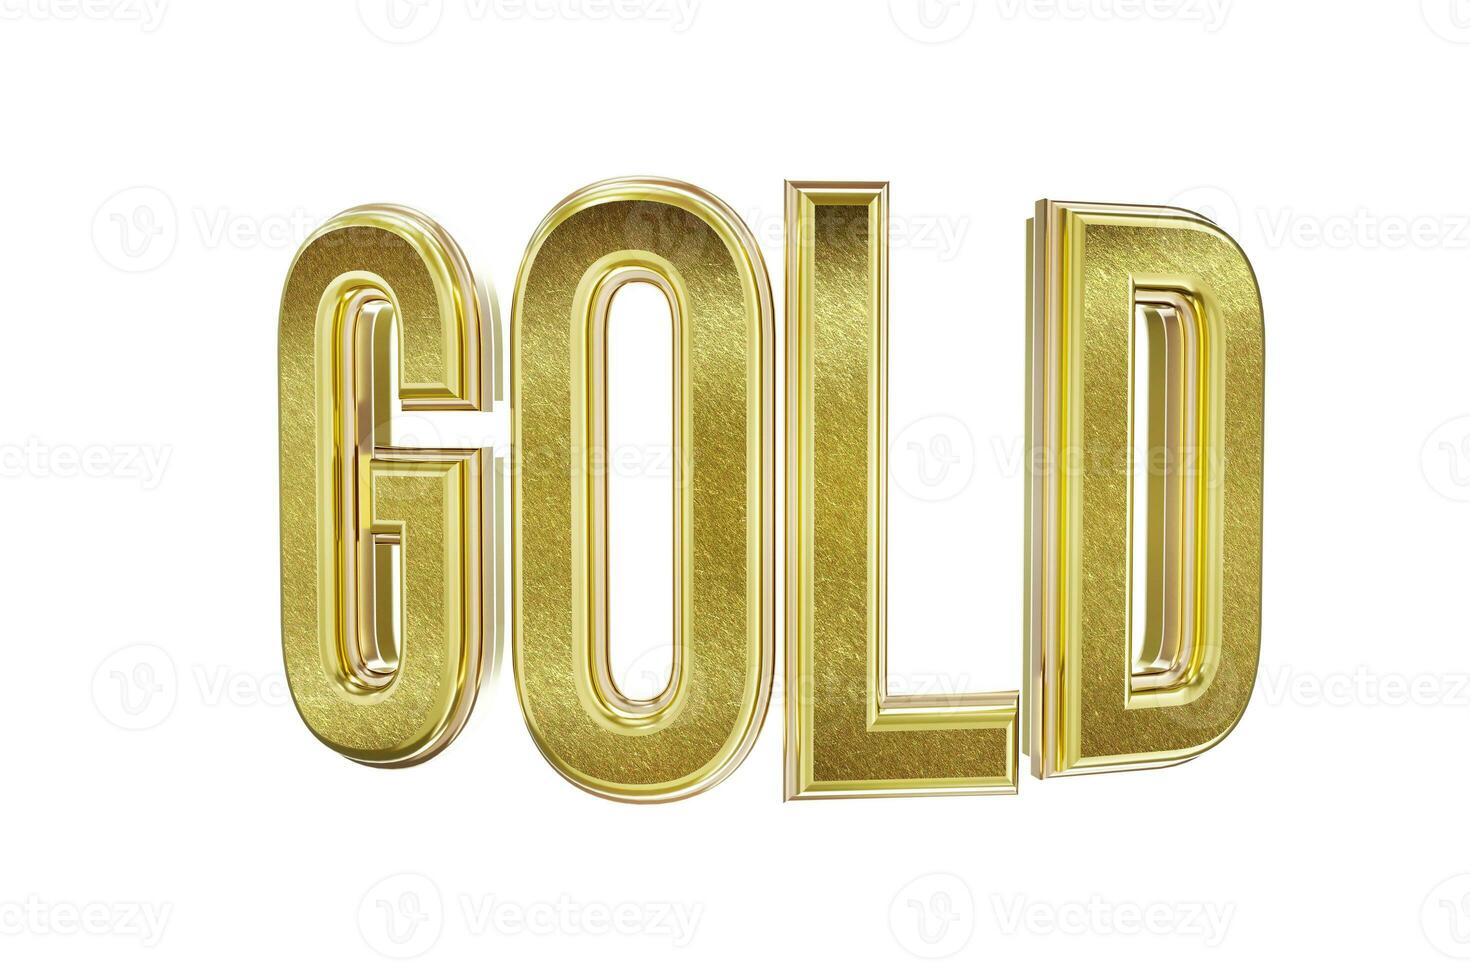 Word Gold written in gold in a 3d render photo